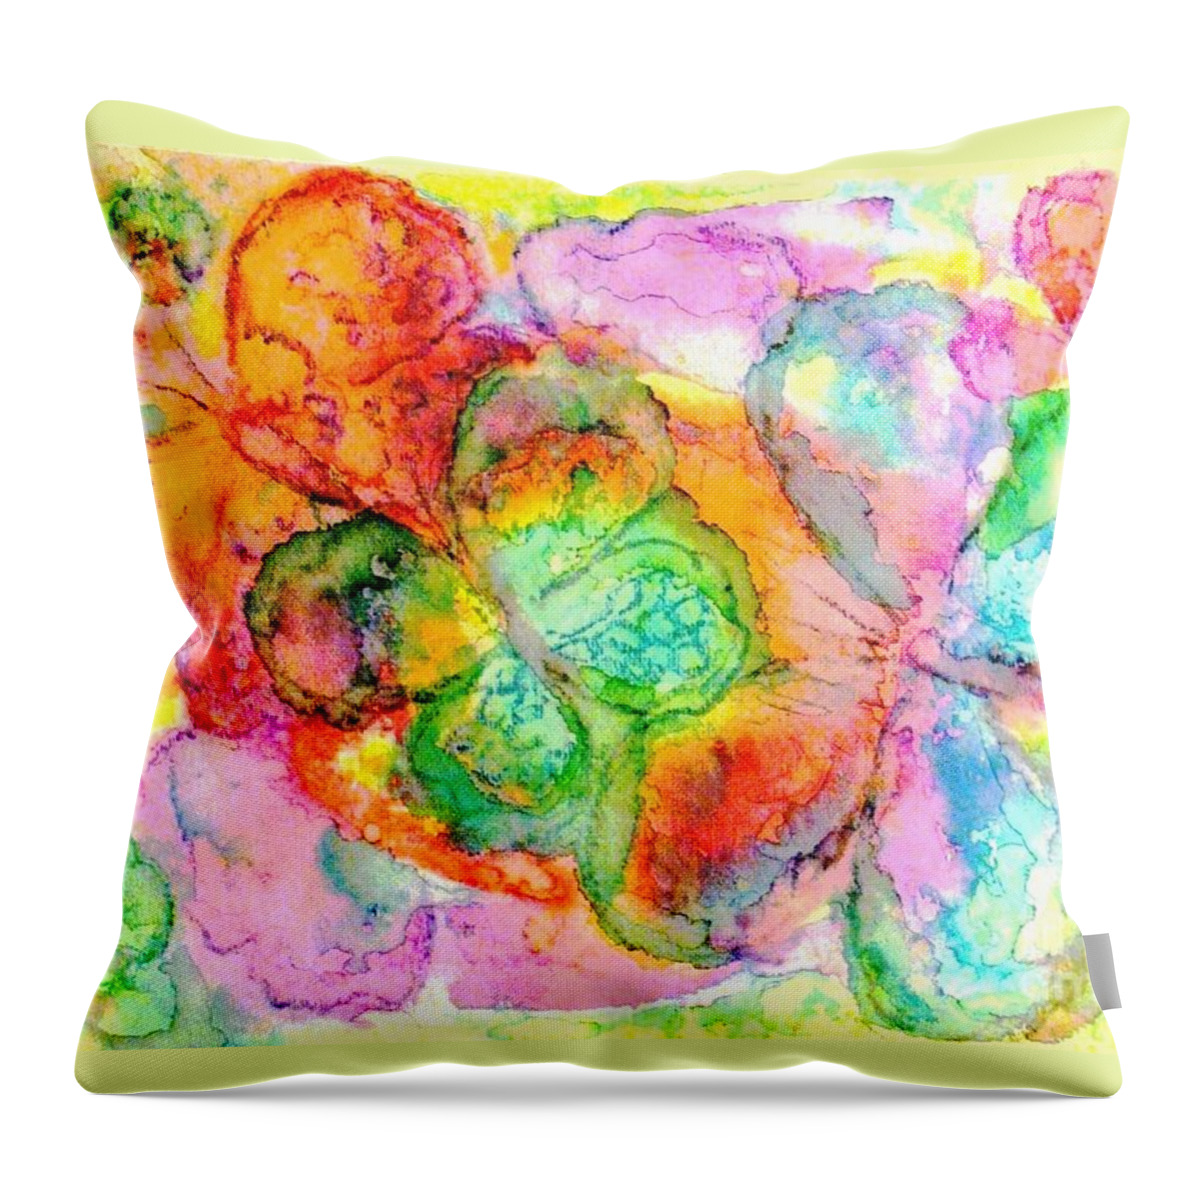 Colorful Butterflies Throw Pillow featuring the painting The Butterfly Dance by Hazel Holland